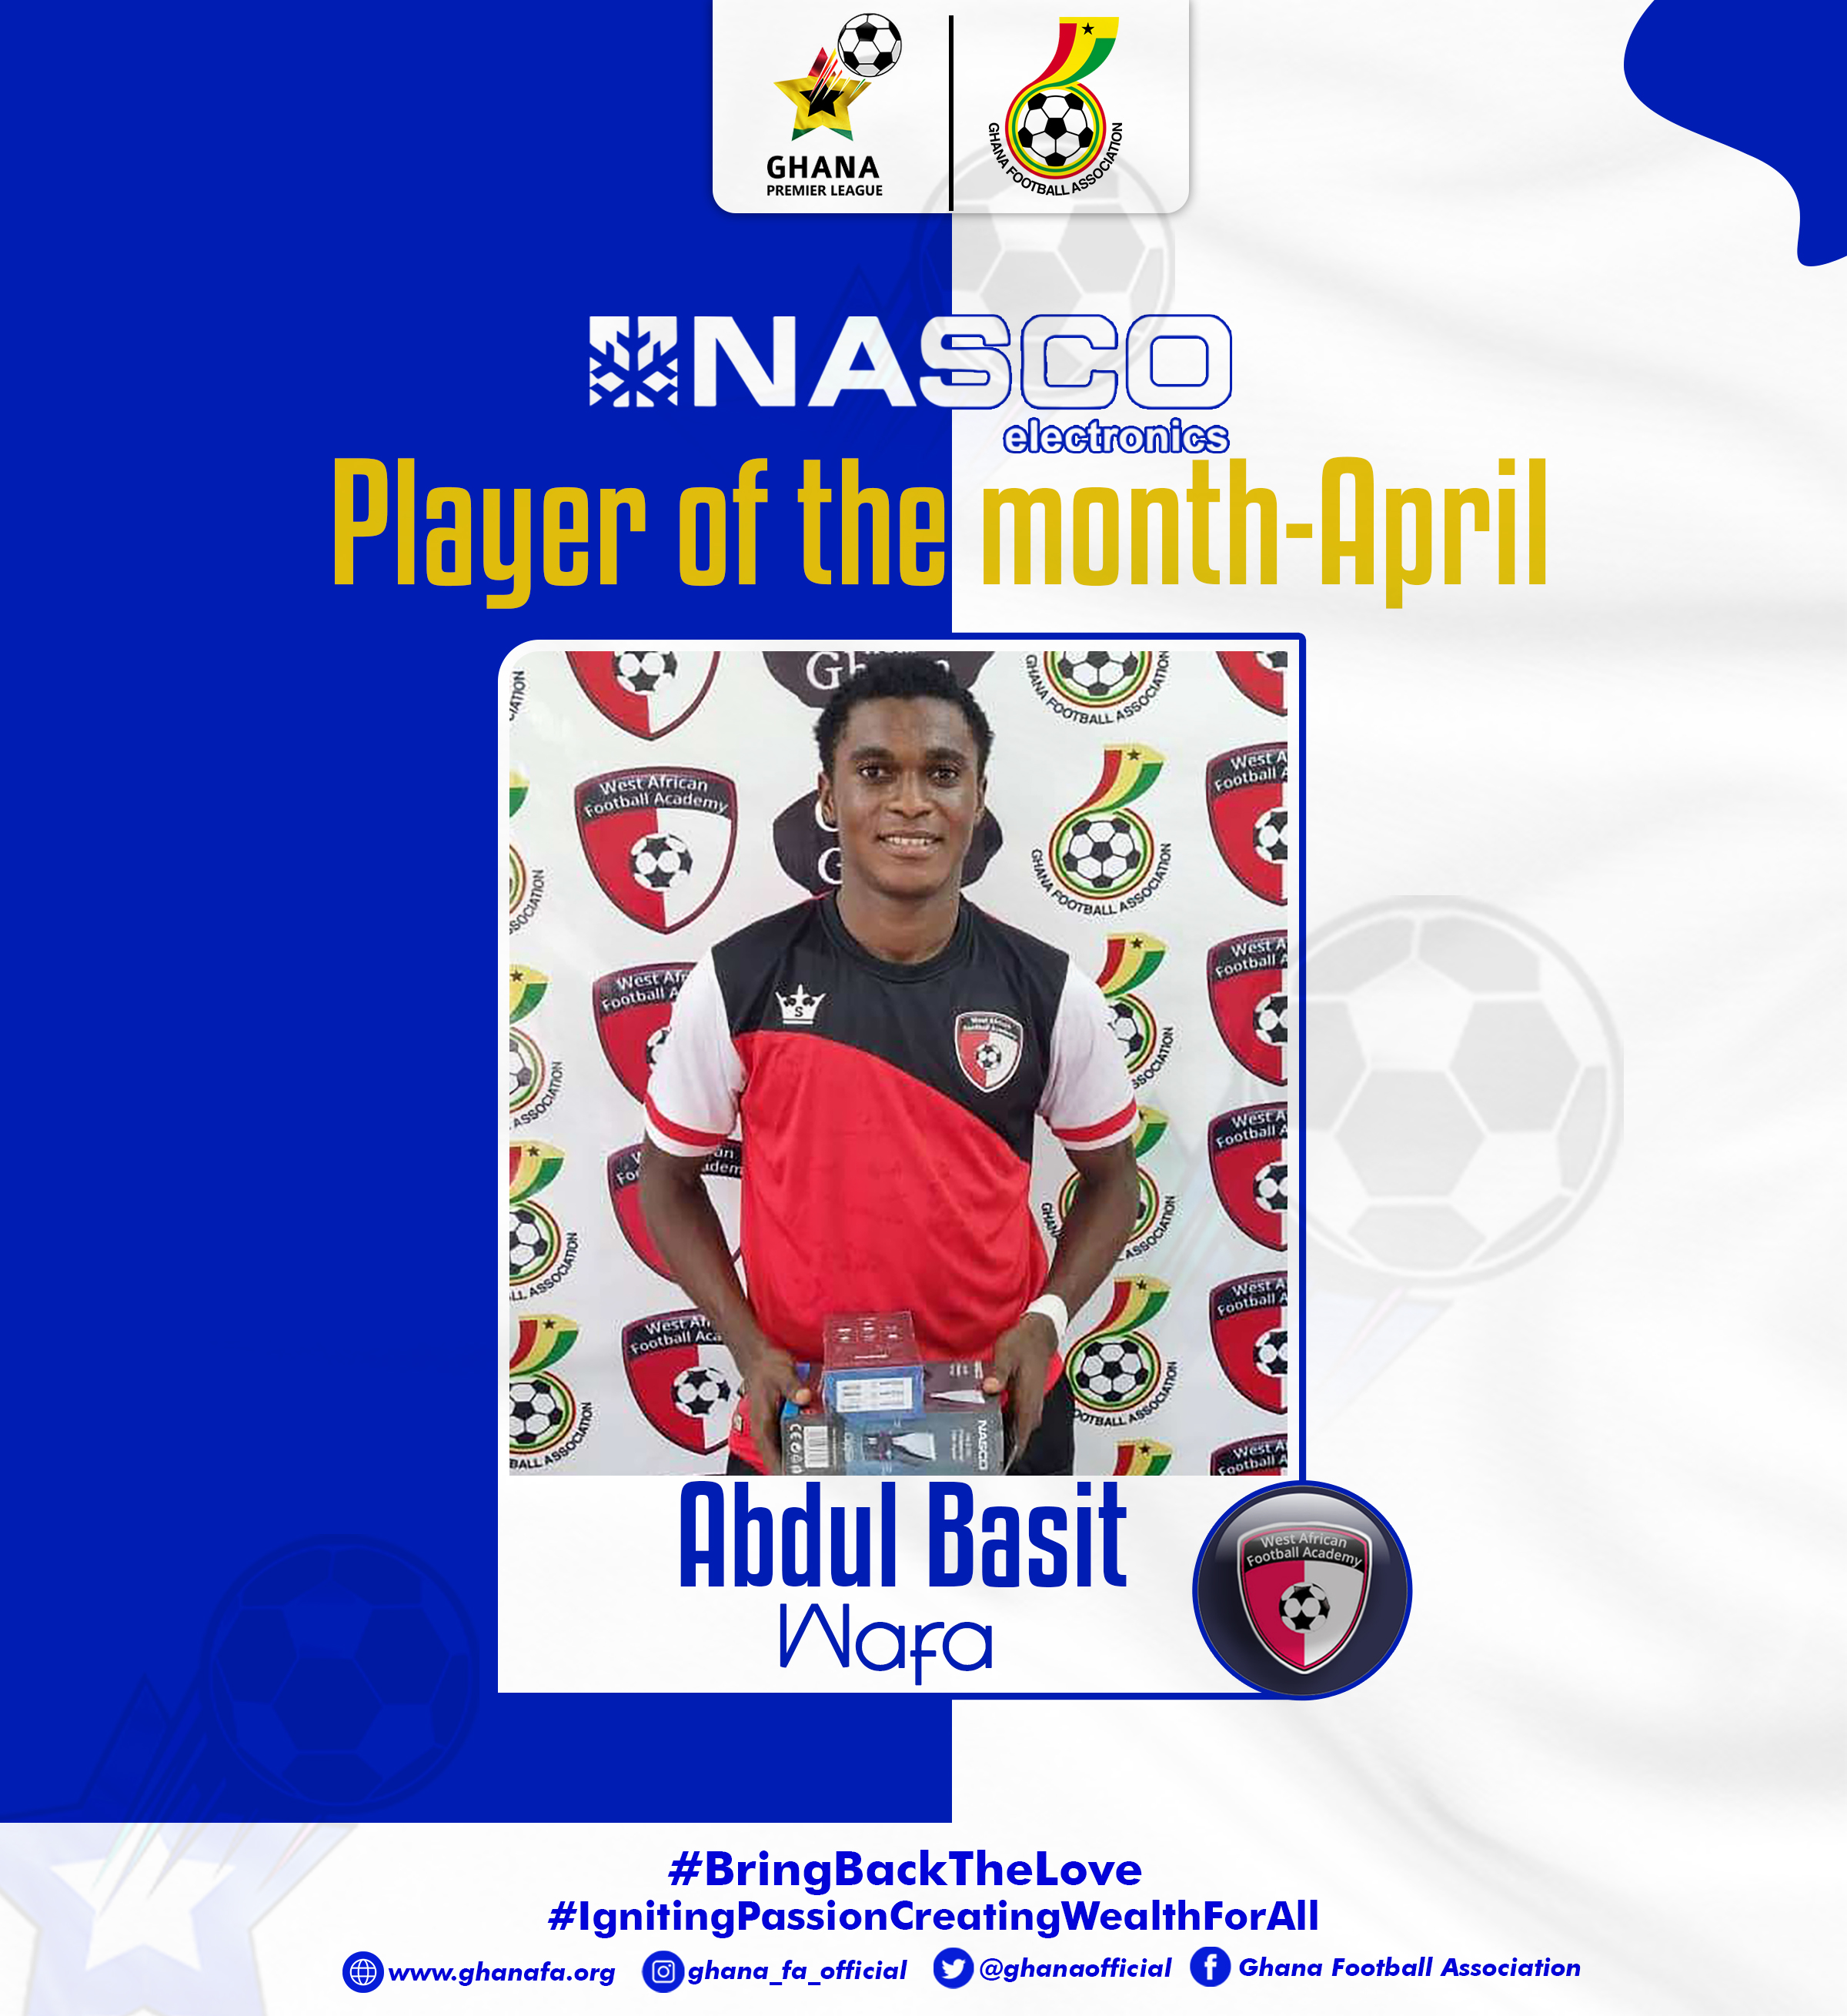 WAFA’s Abdul Basit named as NASCO Player of the month- April